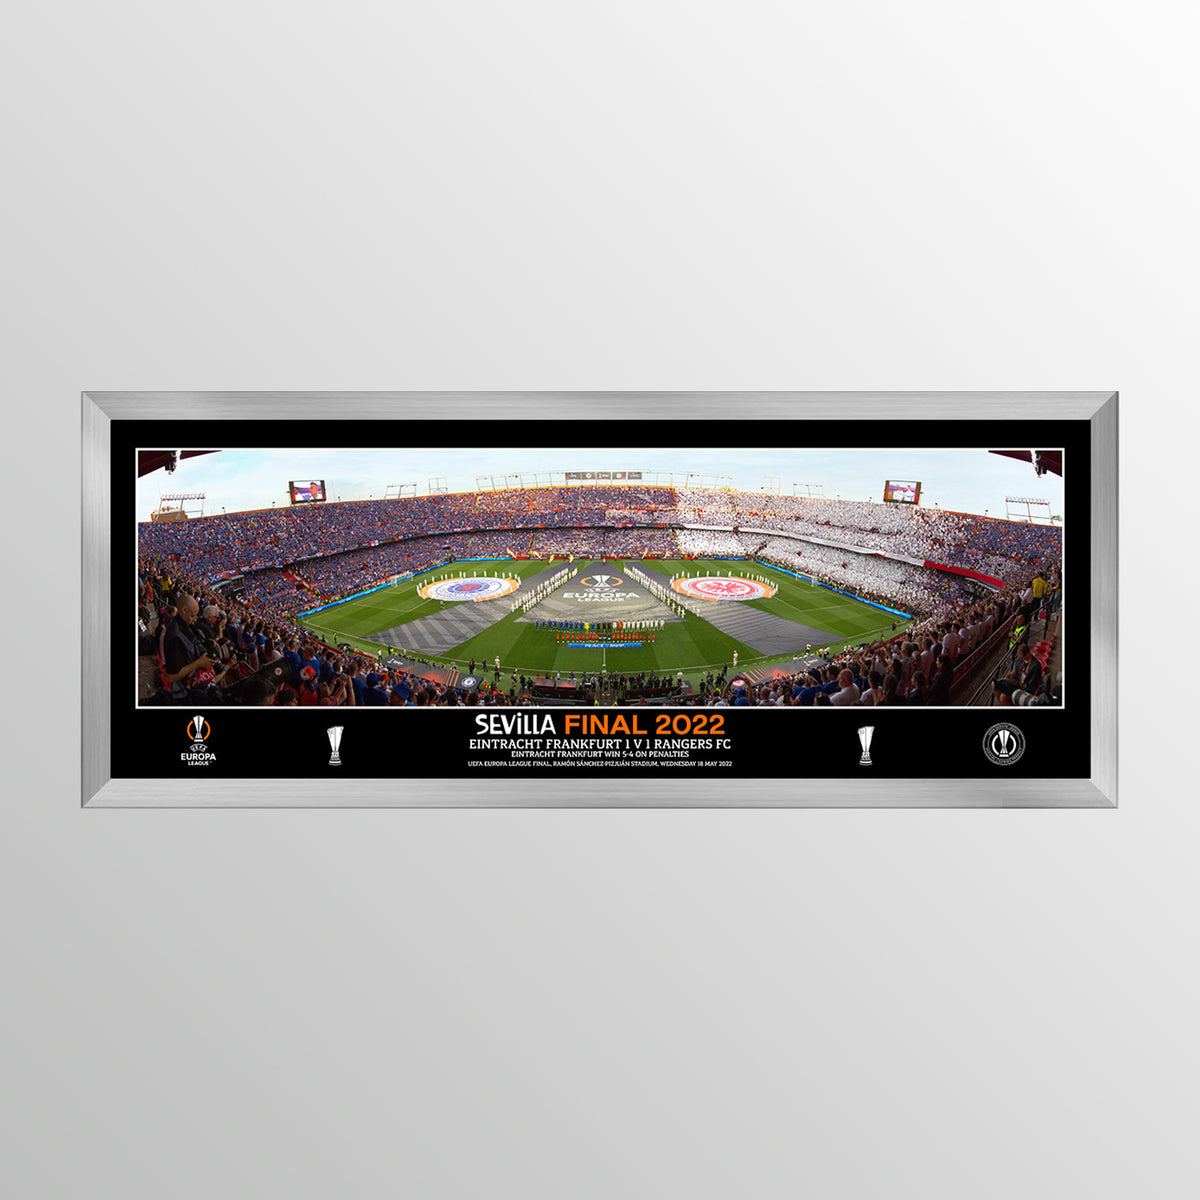 UEFA Europa 30 inch Framed Pano Visual UEFA Club Competitions Online Store